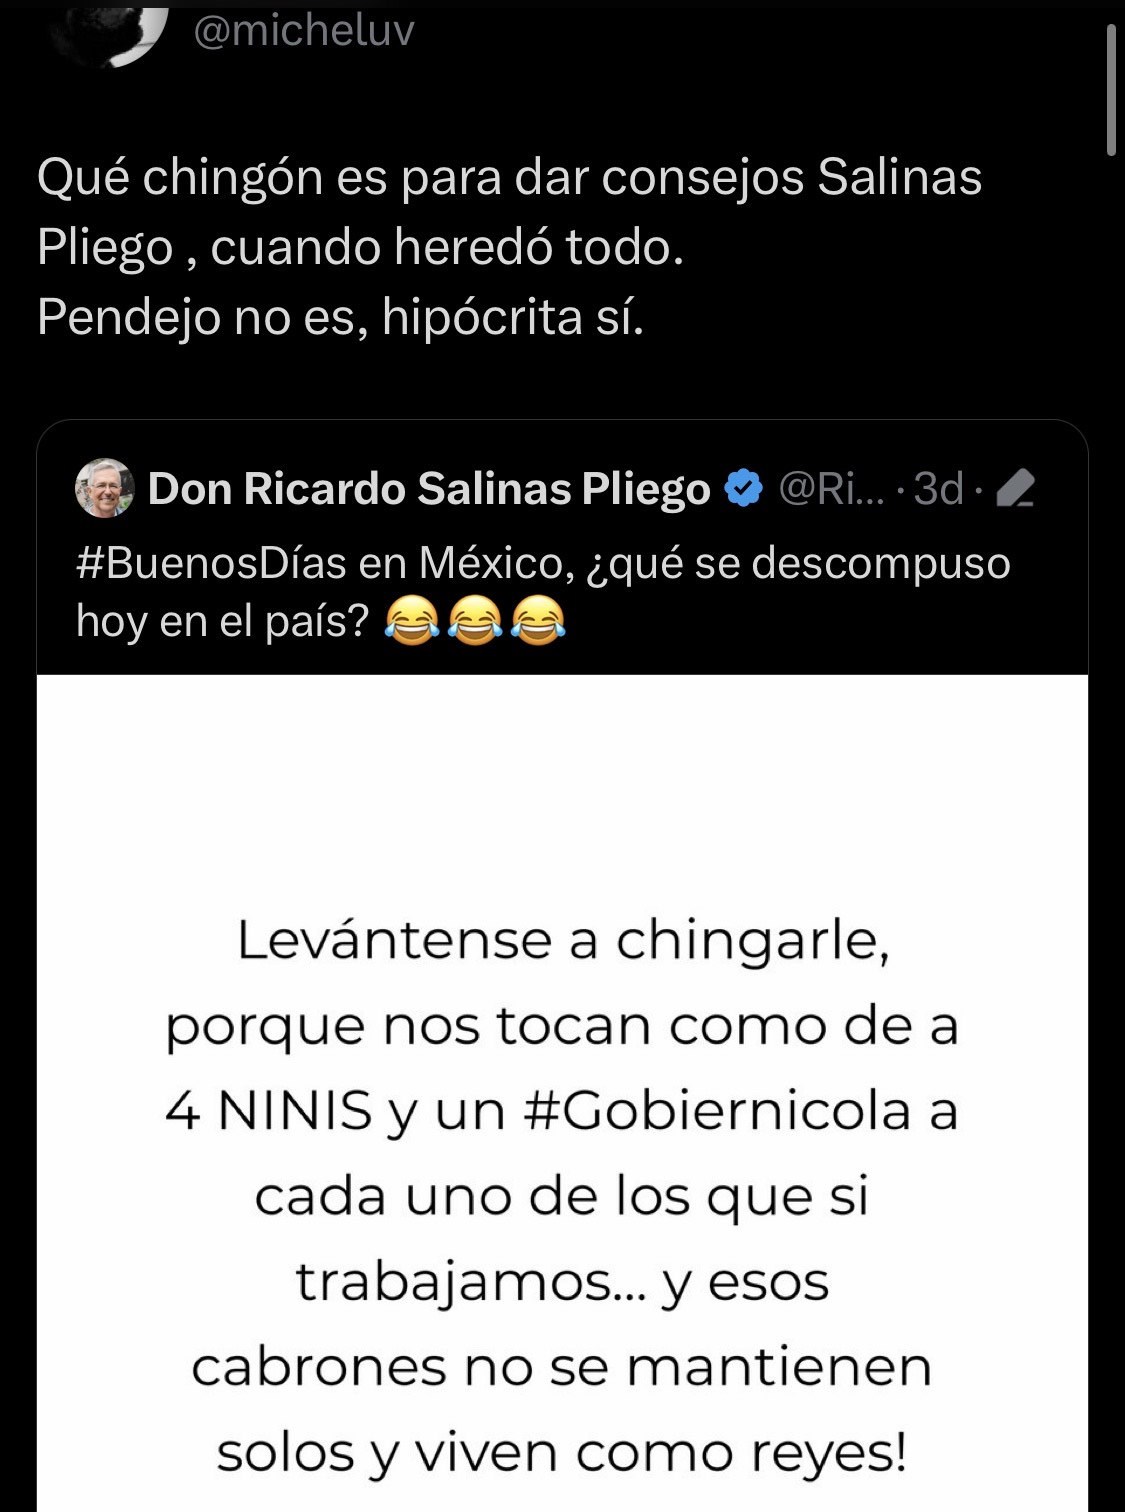 The Mexican tycoon Ricardo Salinas Pliego generates controversy on Twitter for his response to criticism